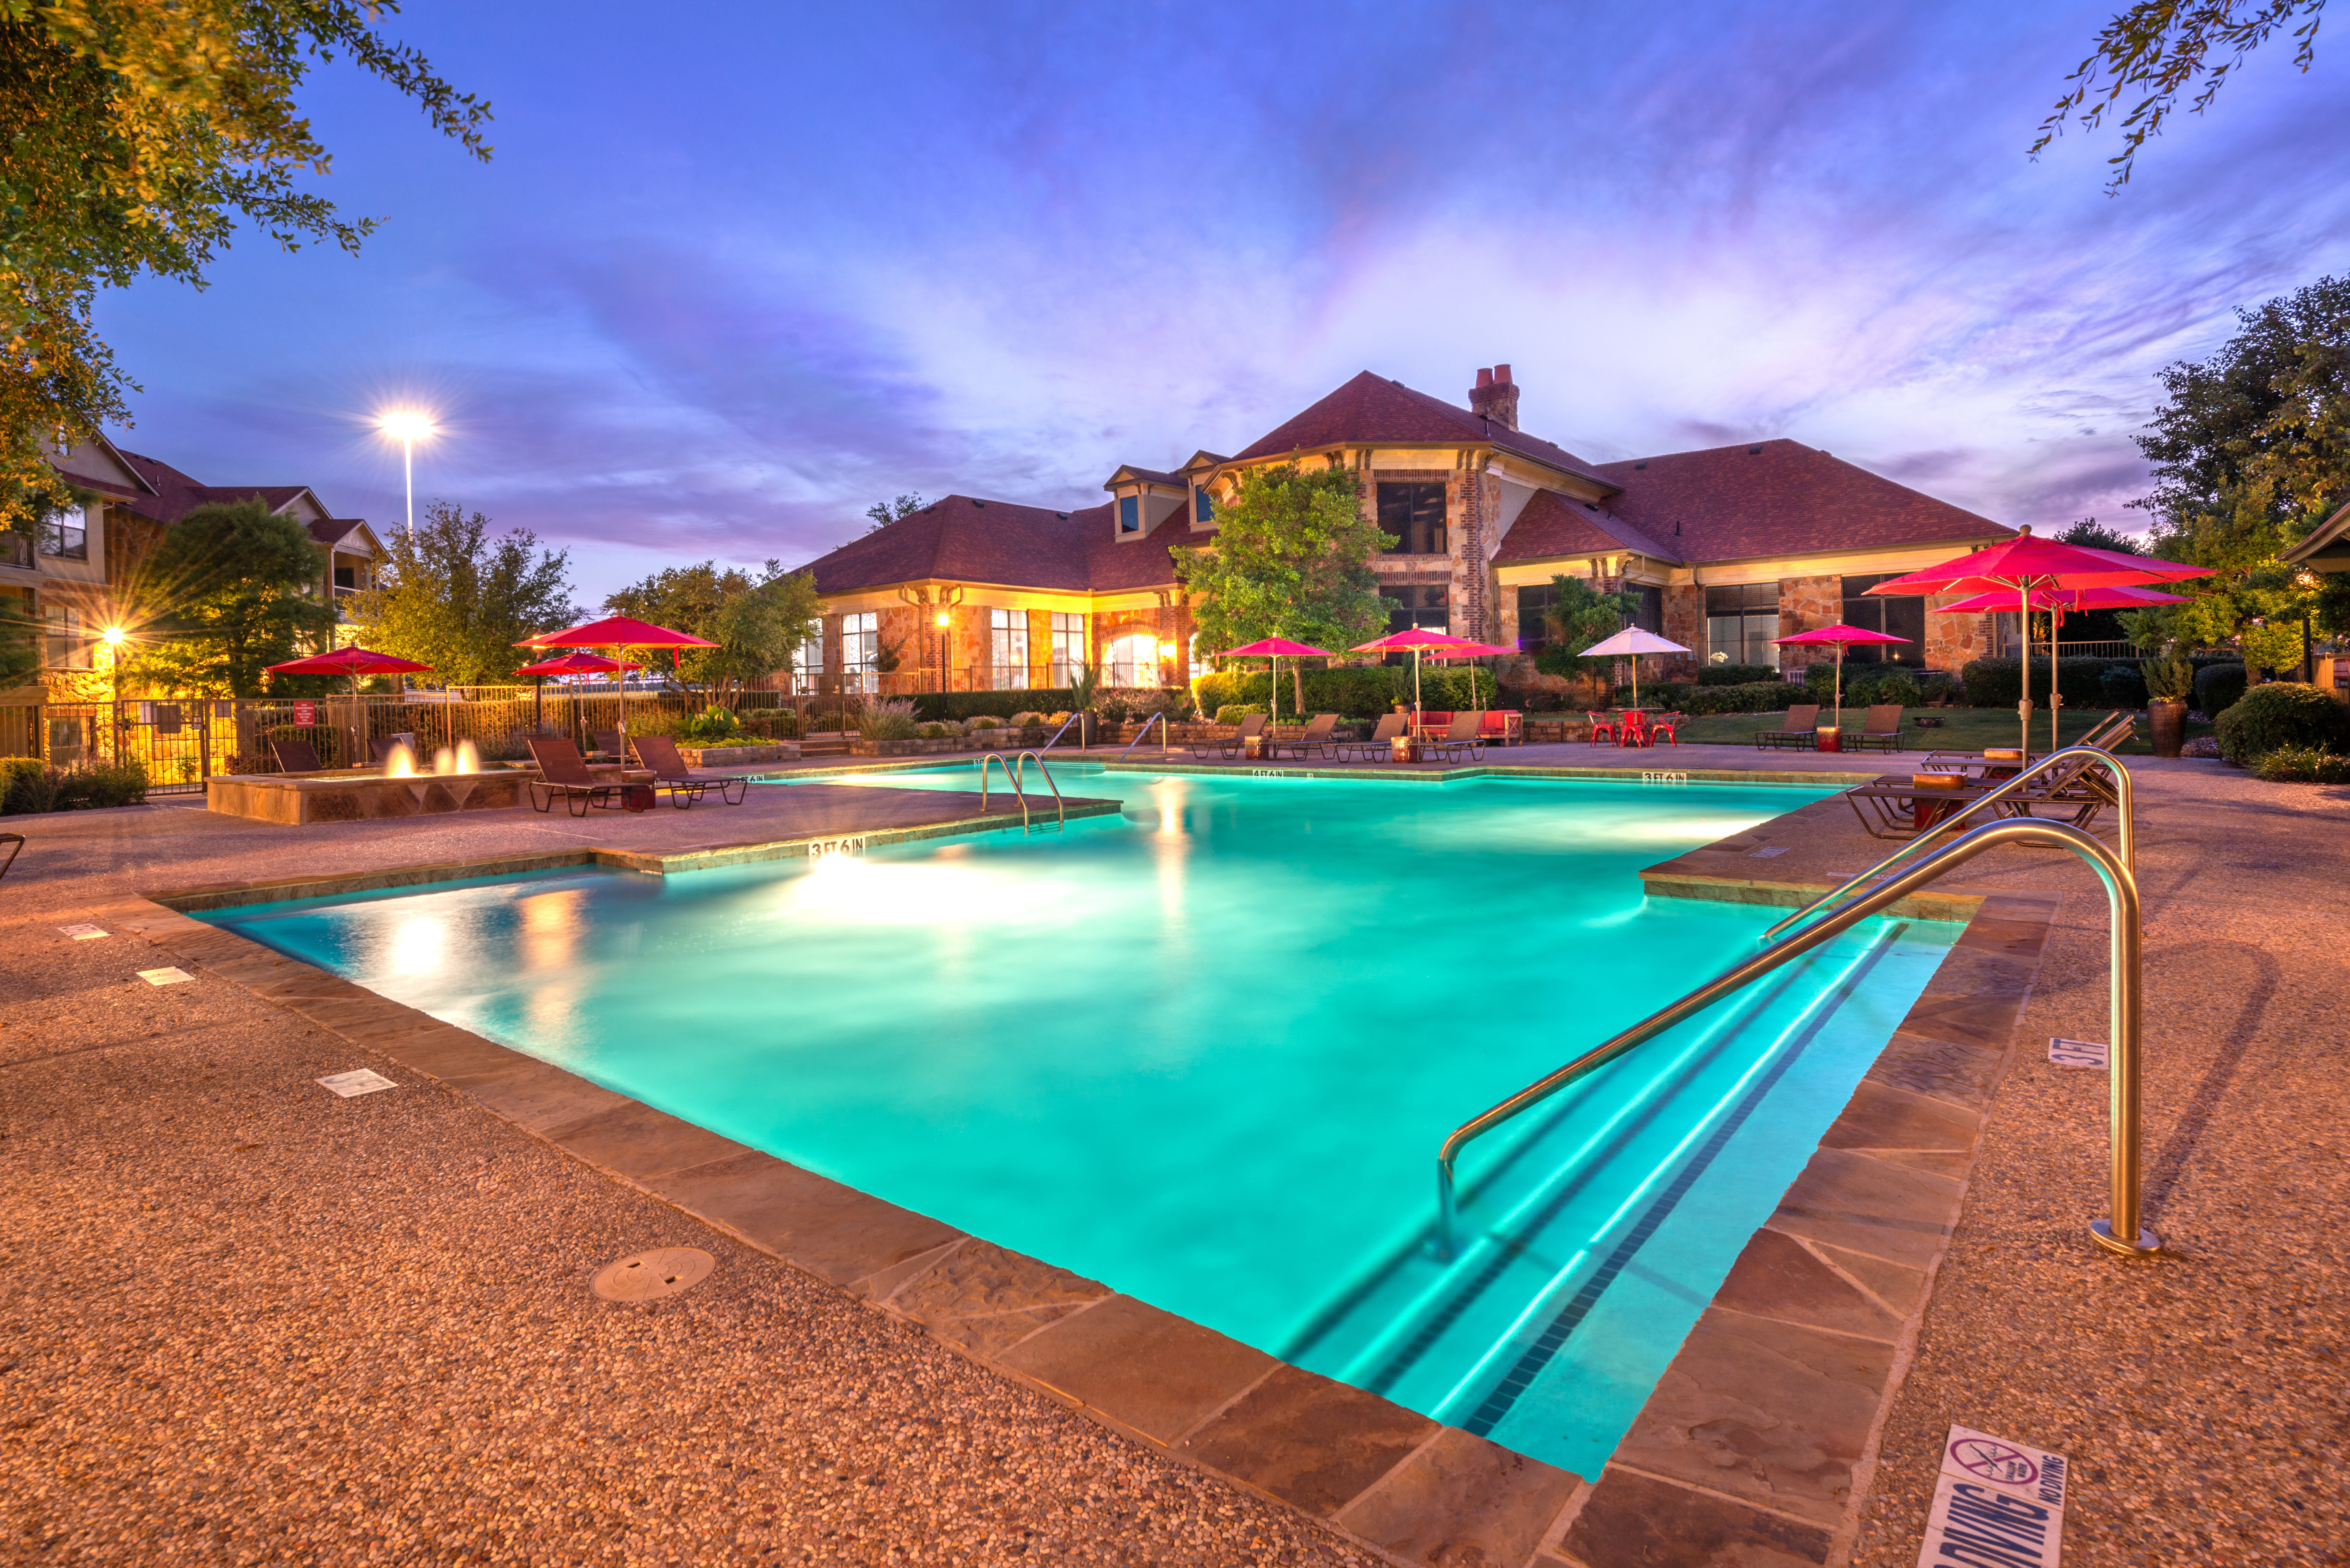 Resort-style swimming pool with a fountain nearby at Olympus Team Ranch in Benbrook, Texas